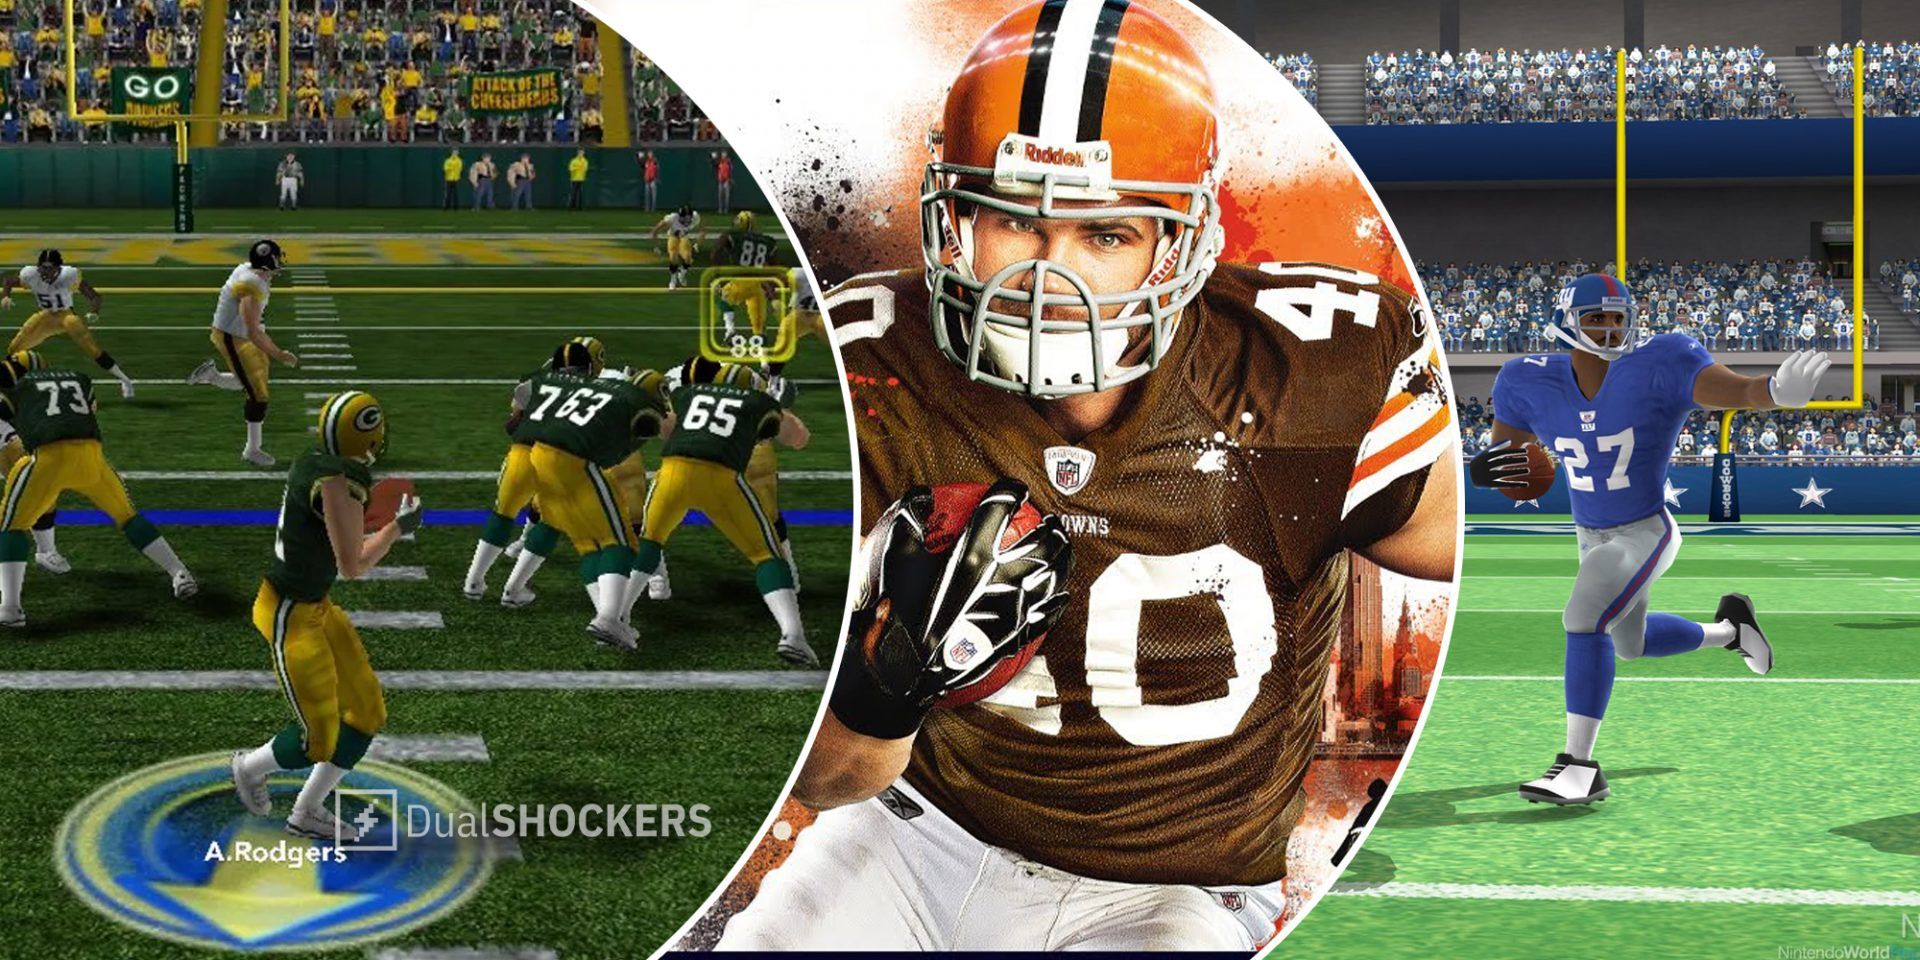 Madden 12 Green Bay Packers screenshot, Madden 12 Peyton Hillis cover art in middle, player with football on right